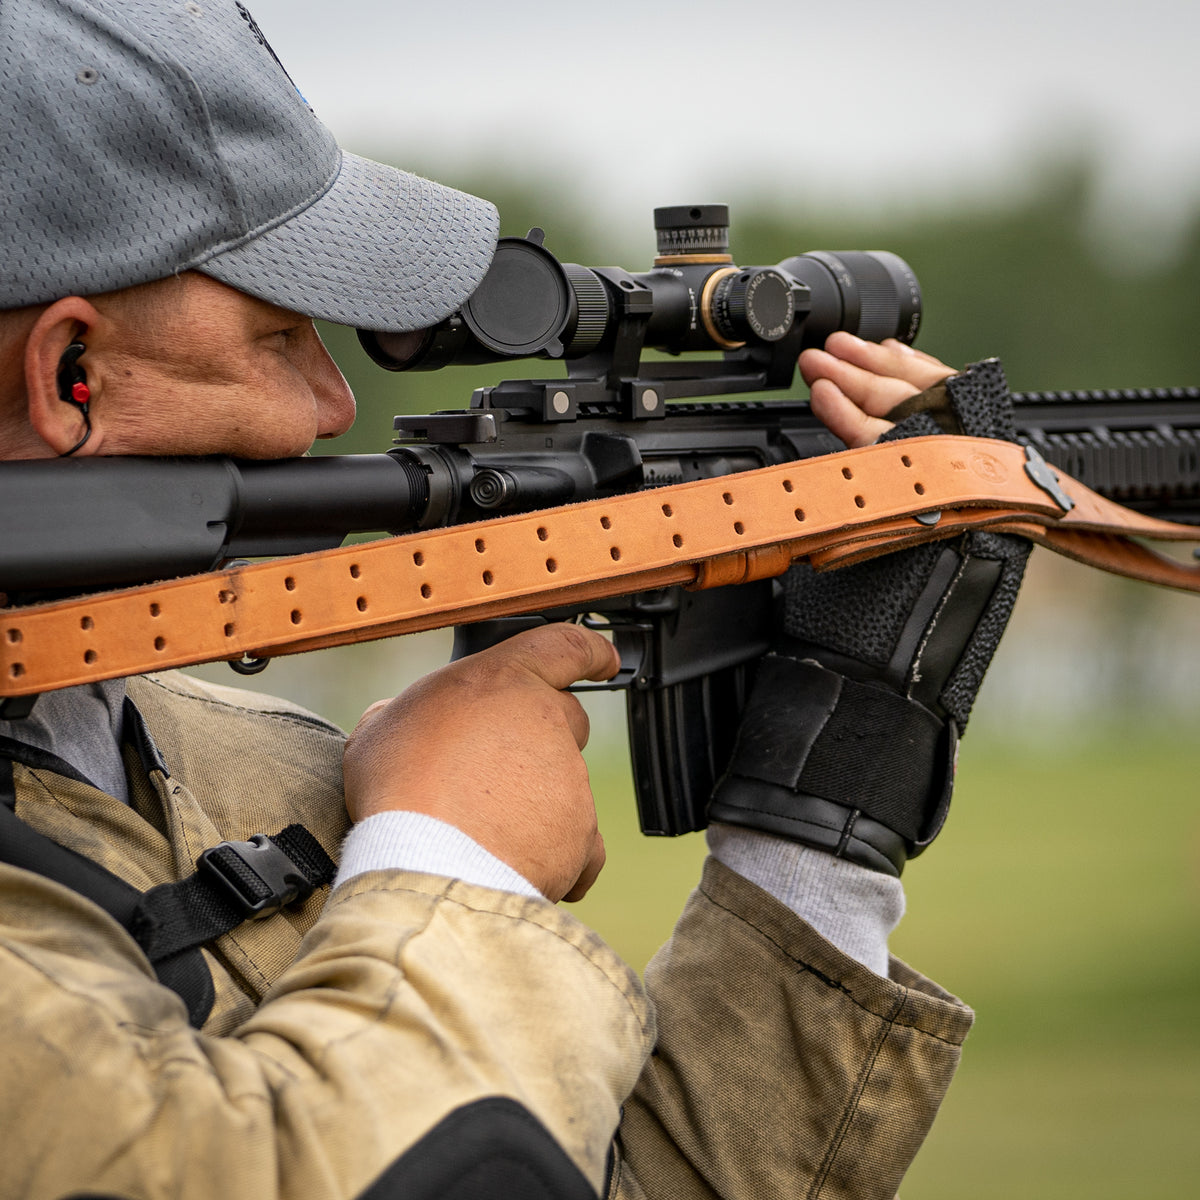 A competitor at the 2019 CMP competition with an XTC scope